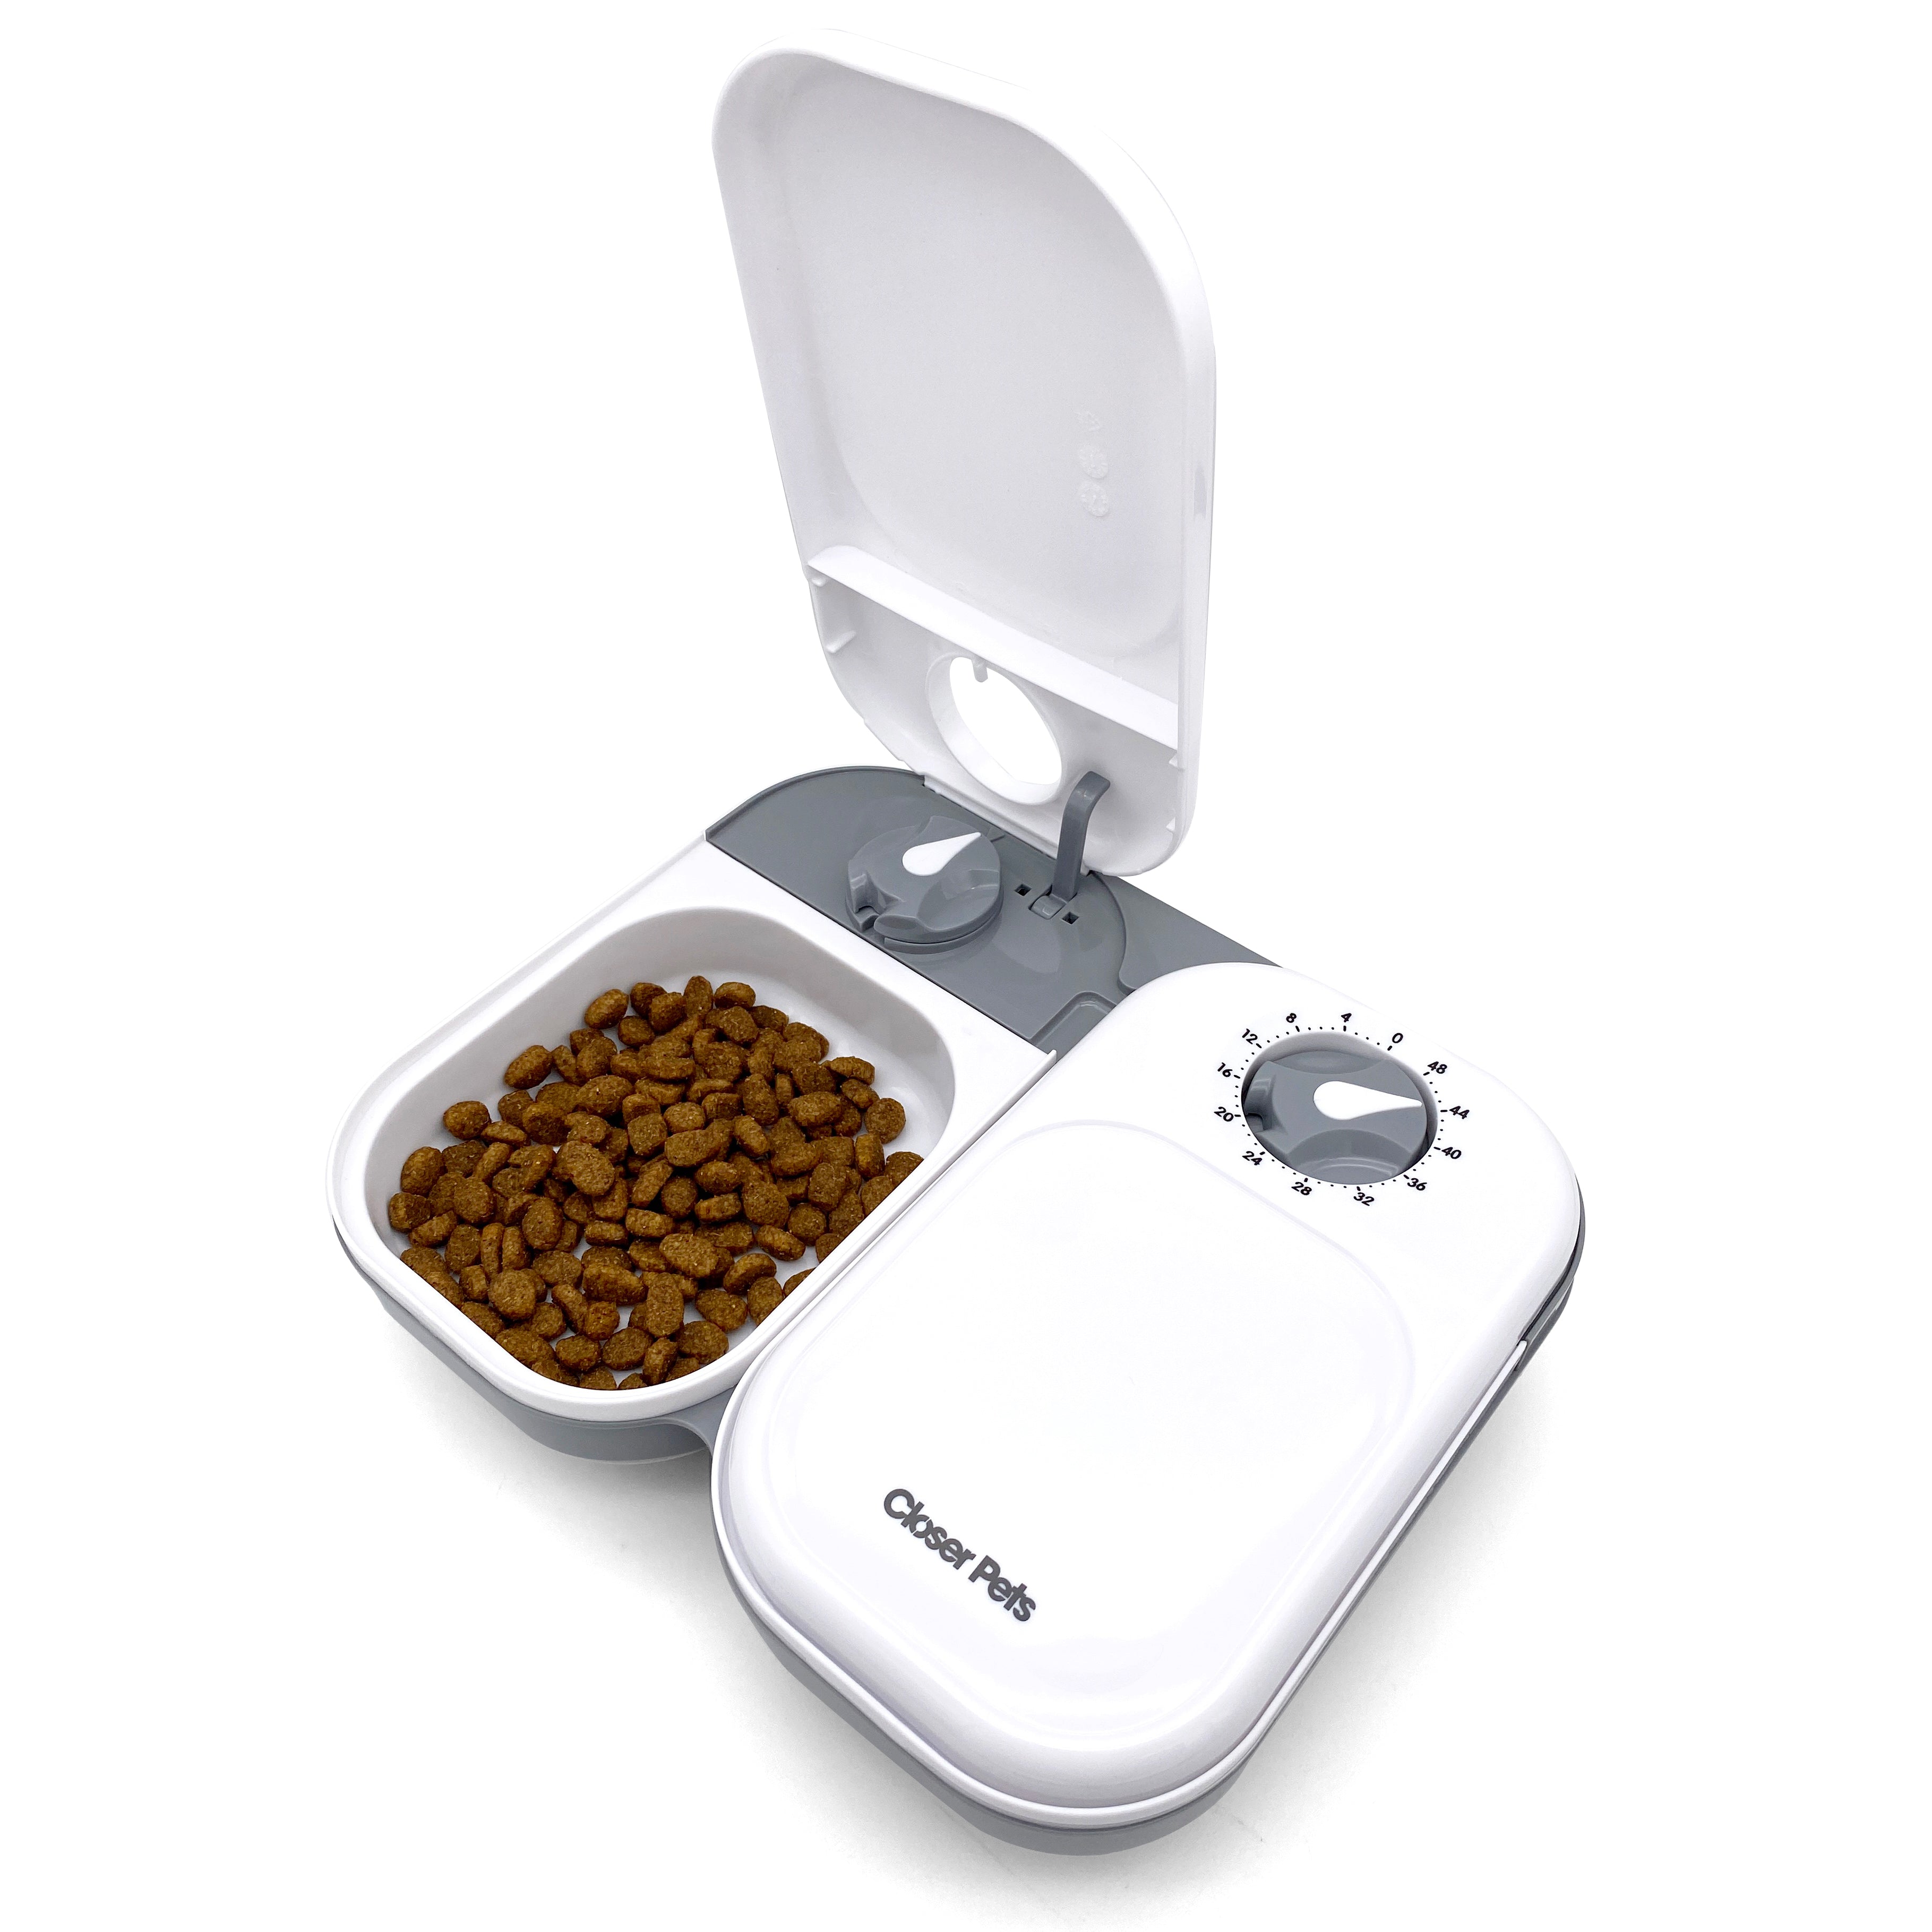 Closer Pets Two-meal Automatic Dry/Wet Food Pet Feeder (C200)